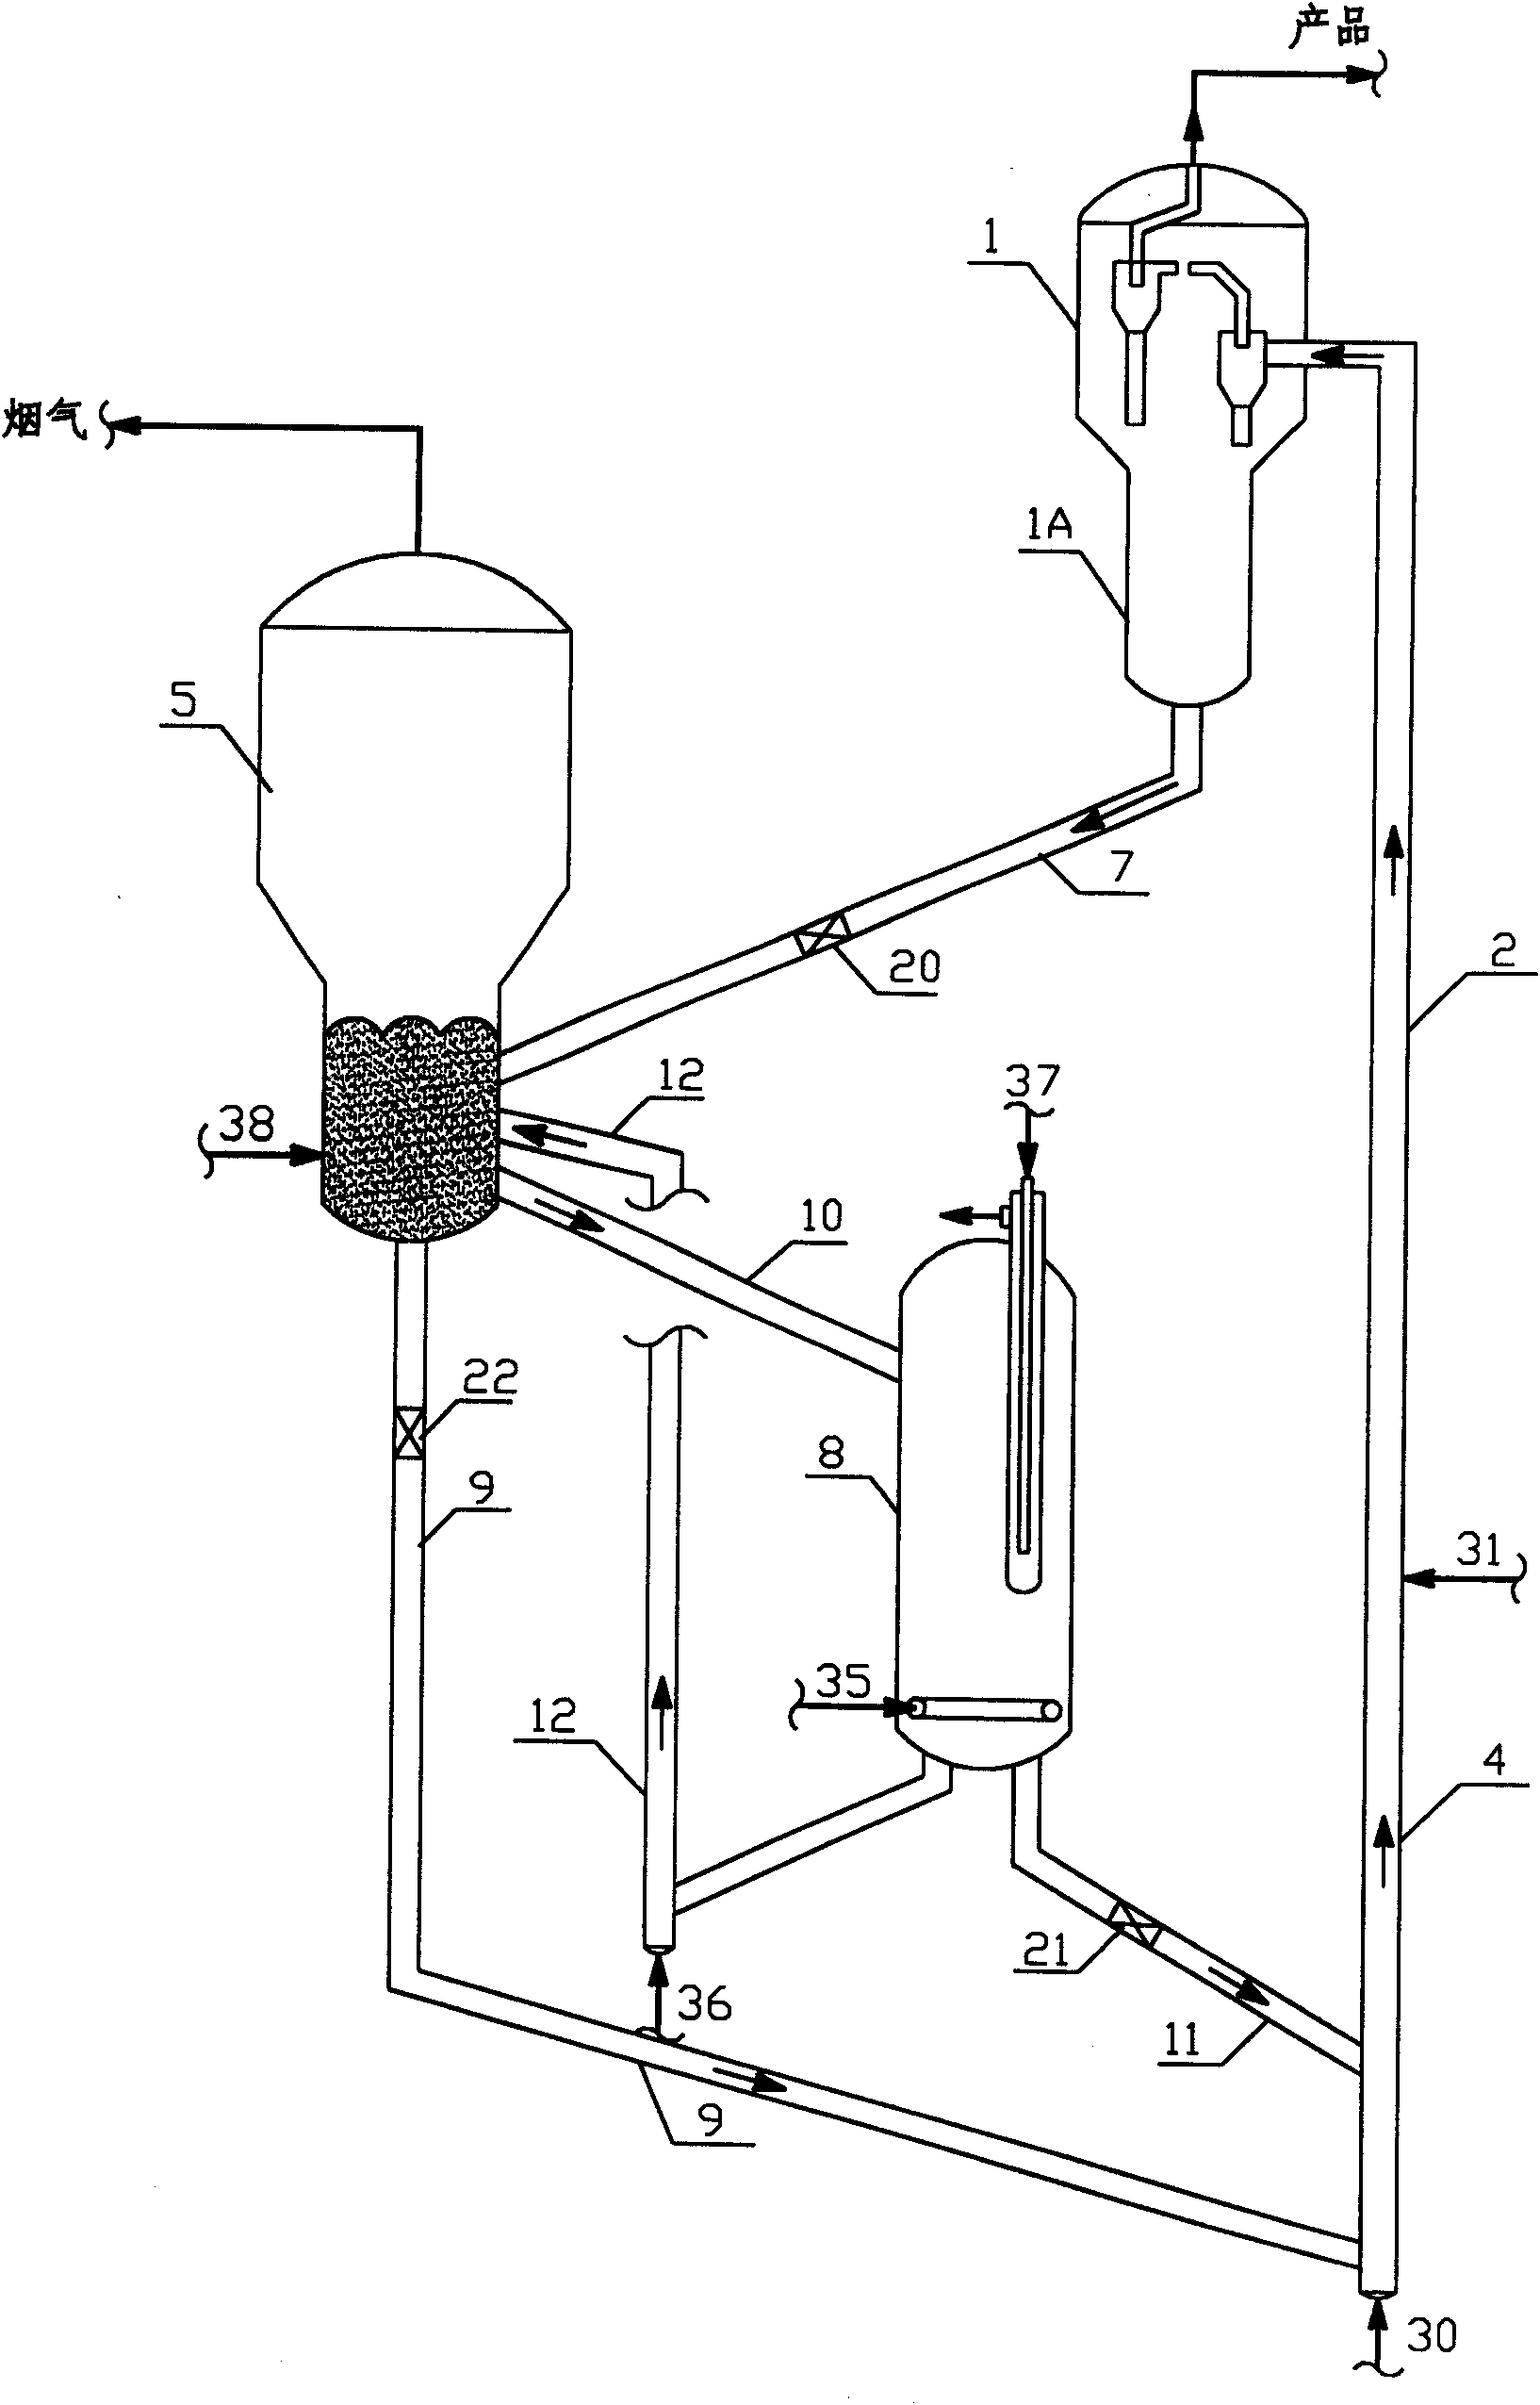 Method and device for catalytic conversion of light dydrocarbon